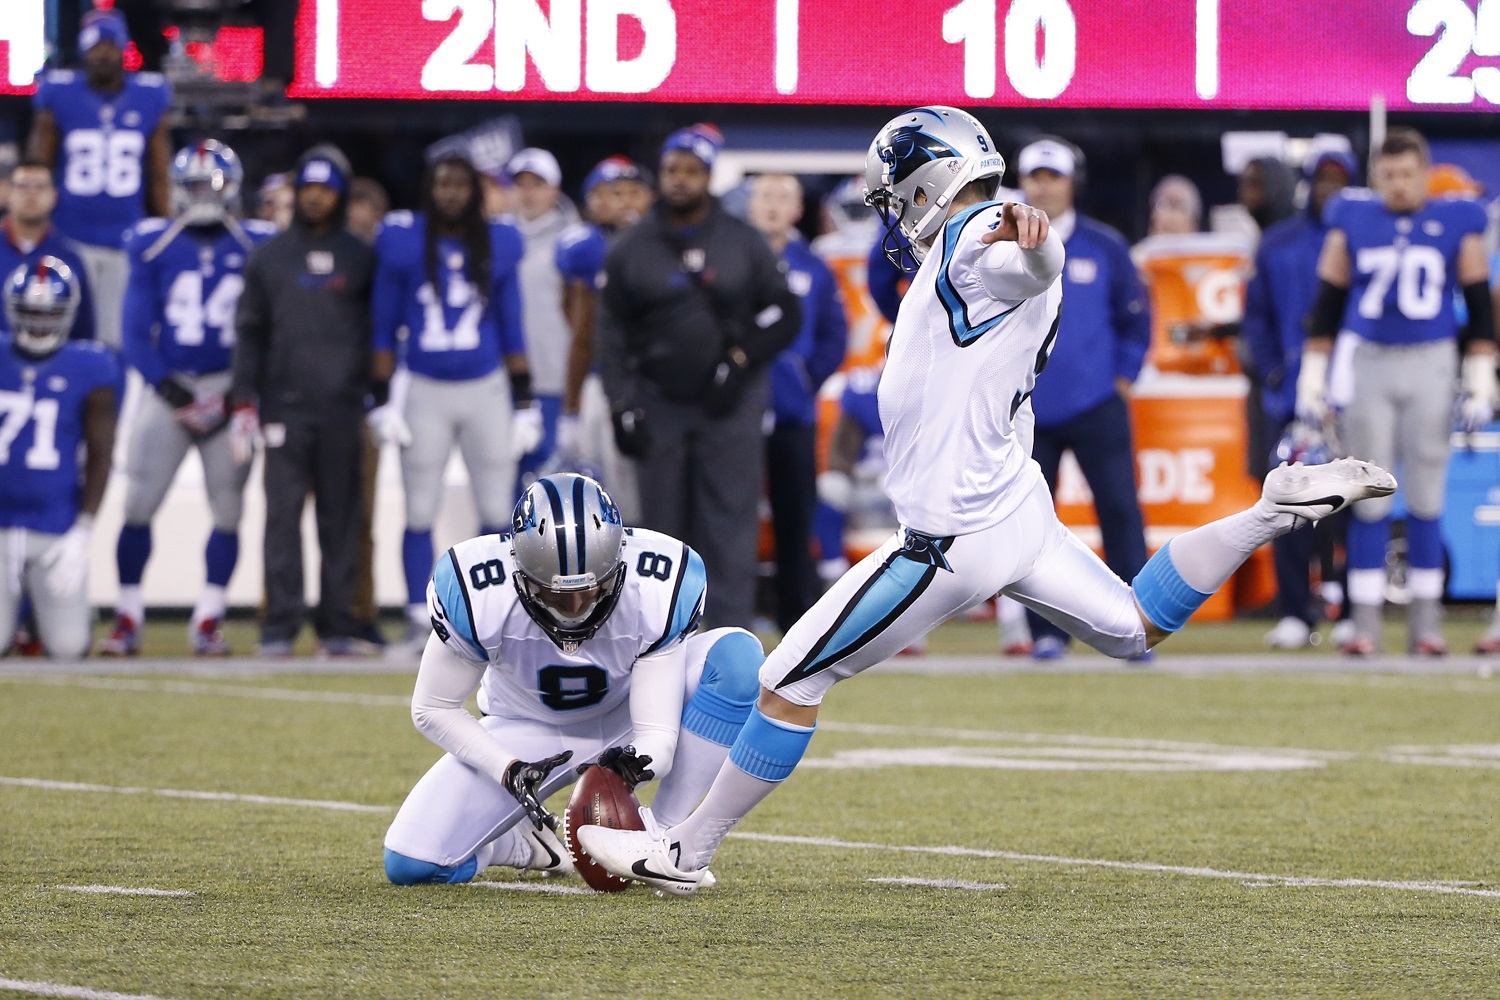 Carolina Panthers kicker Graham Gano kicks a field goal to win during the second half of an NFL football game Sunday, Dec. 20, 2015, in East Rutherford, N.J. The Panthers won 38-35. (AP Photo/Kathy Willens)